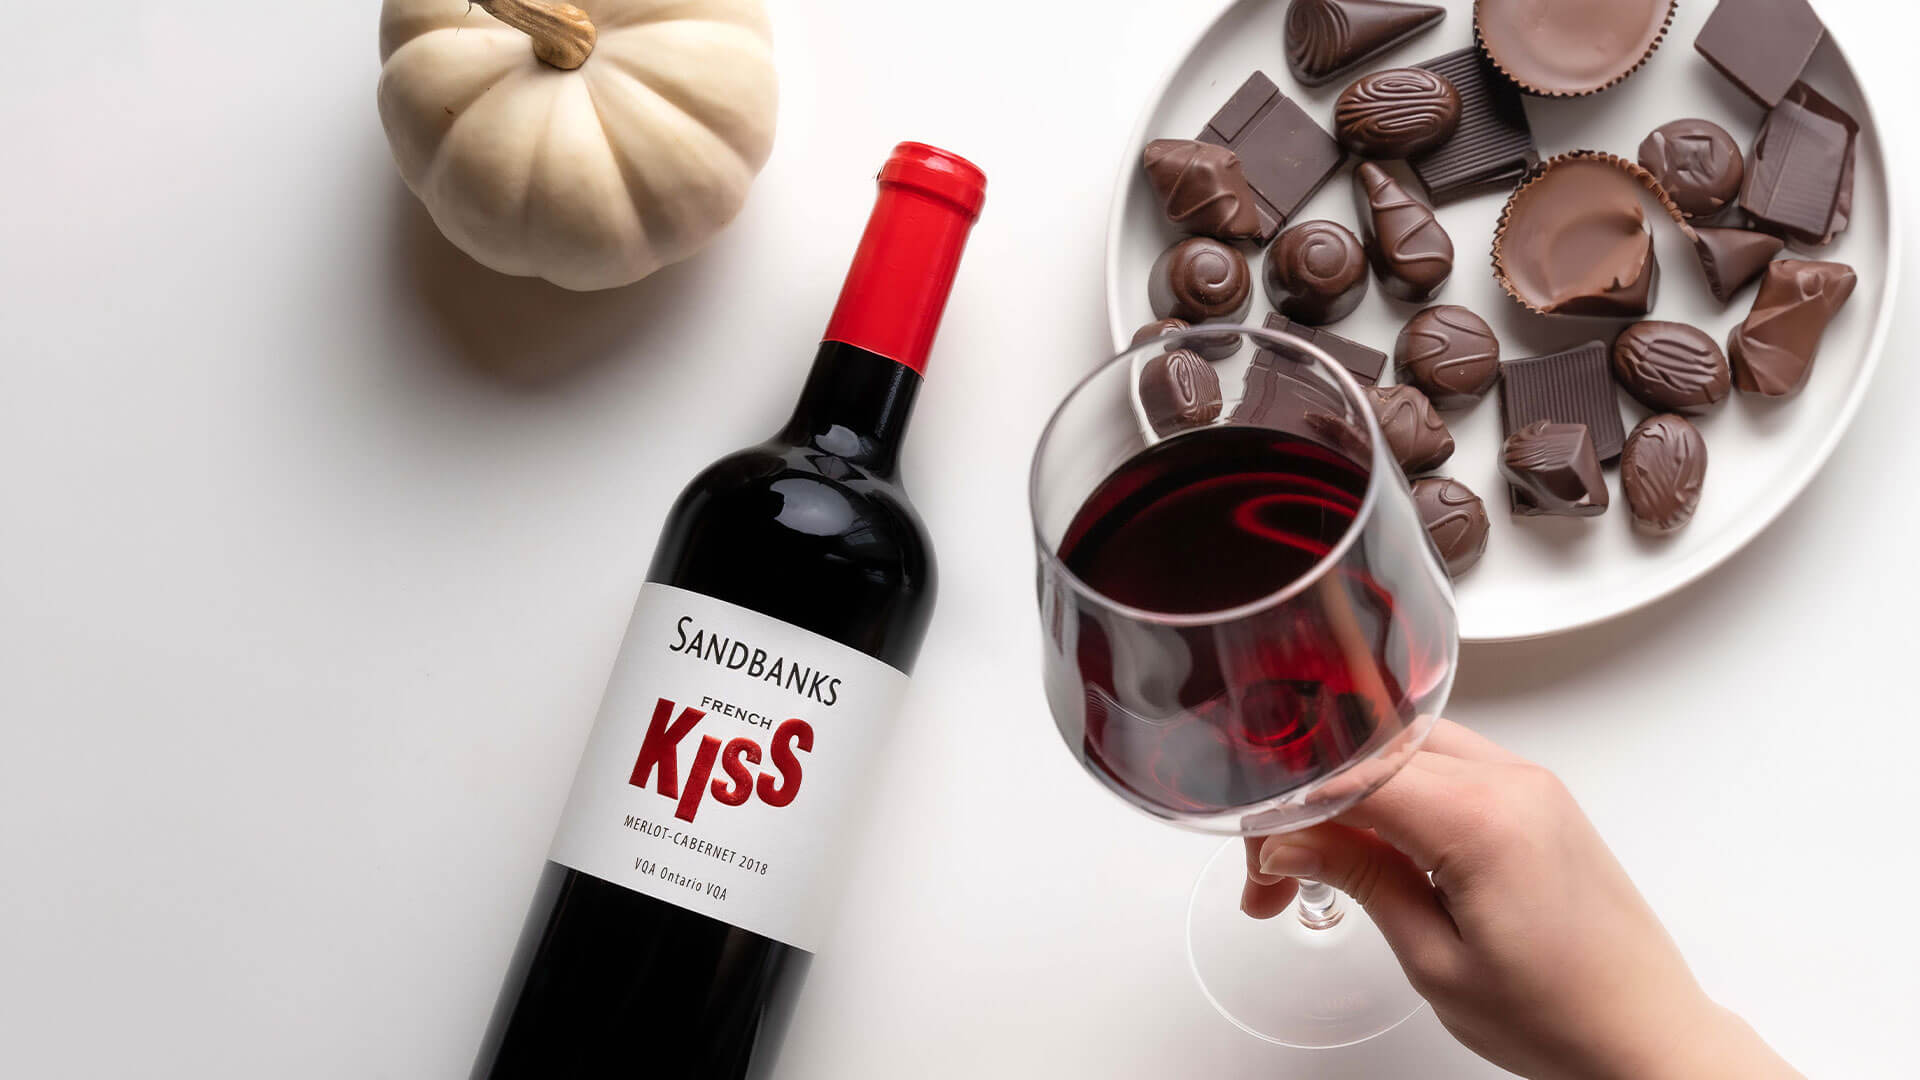 Sandbanks French Kiss Red wine paired with plates of different chocolates.